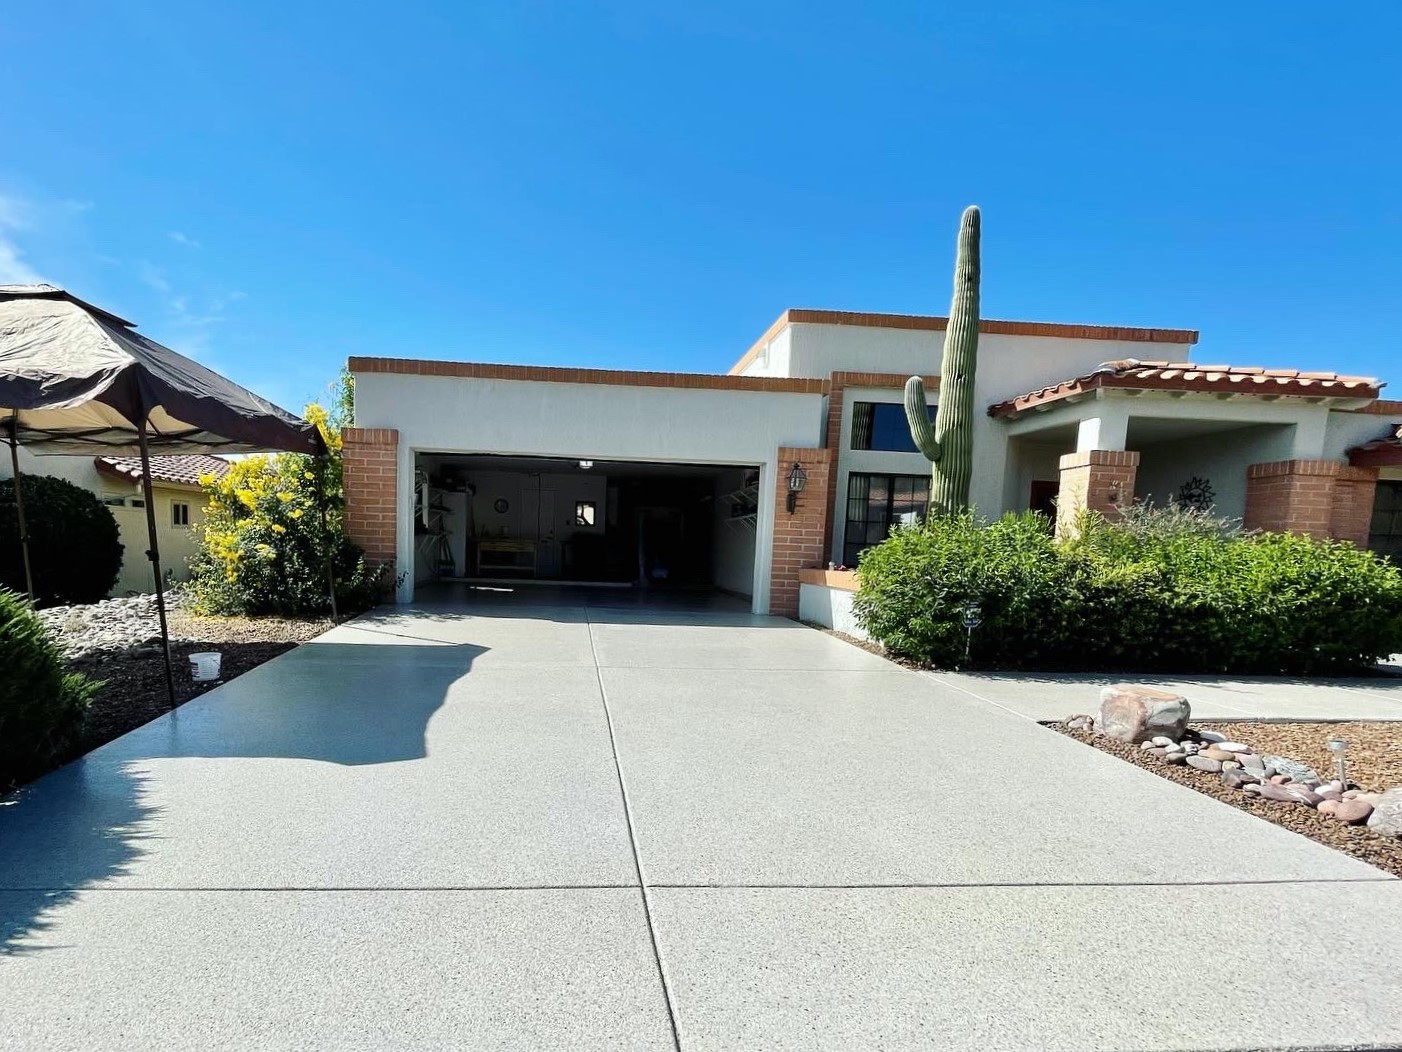 Superior Driveway, Walkway, Garage Combo Coating Service Completed In Oro Valley, AZ